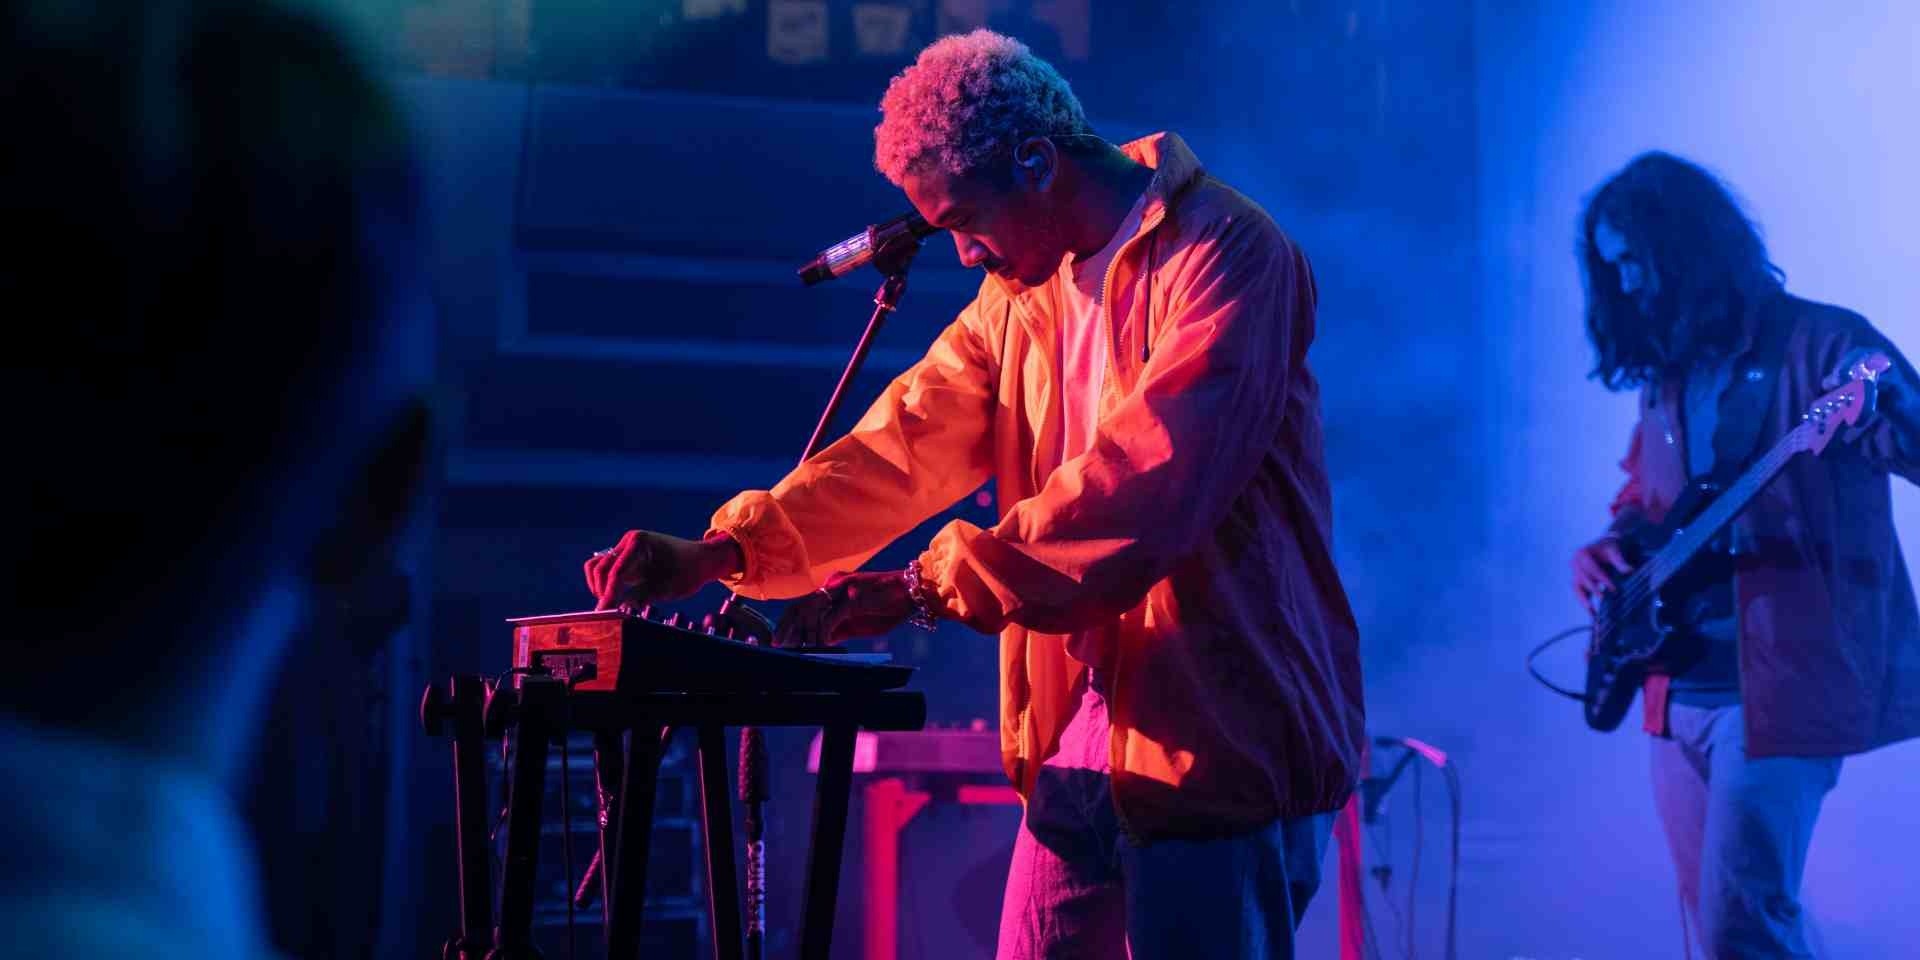 Toro y Moi captained a sweet, sensuous dance party in the heart of the CBD – gig review